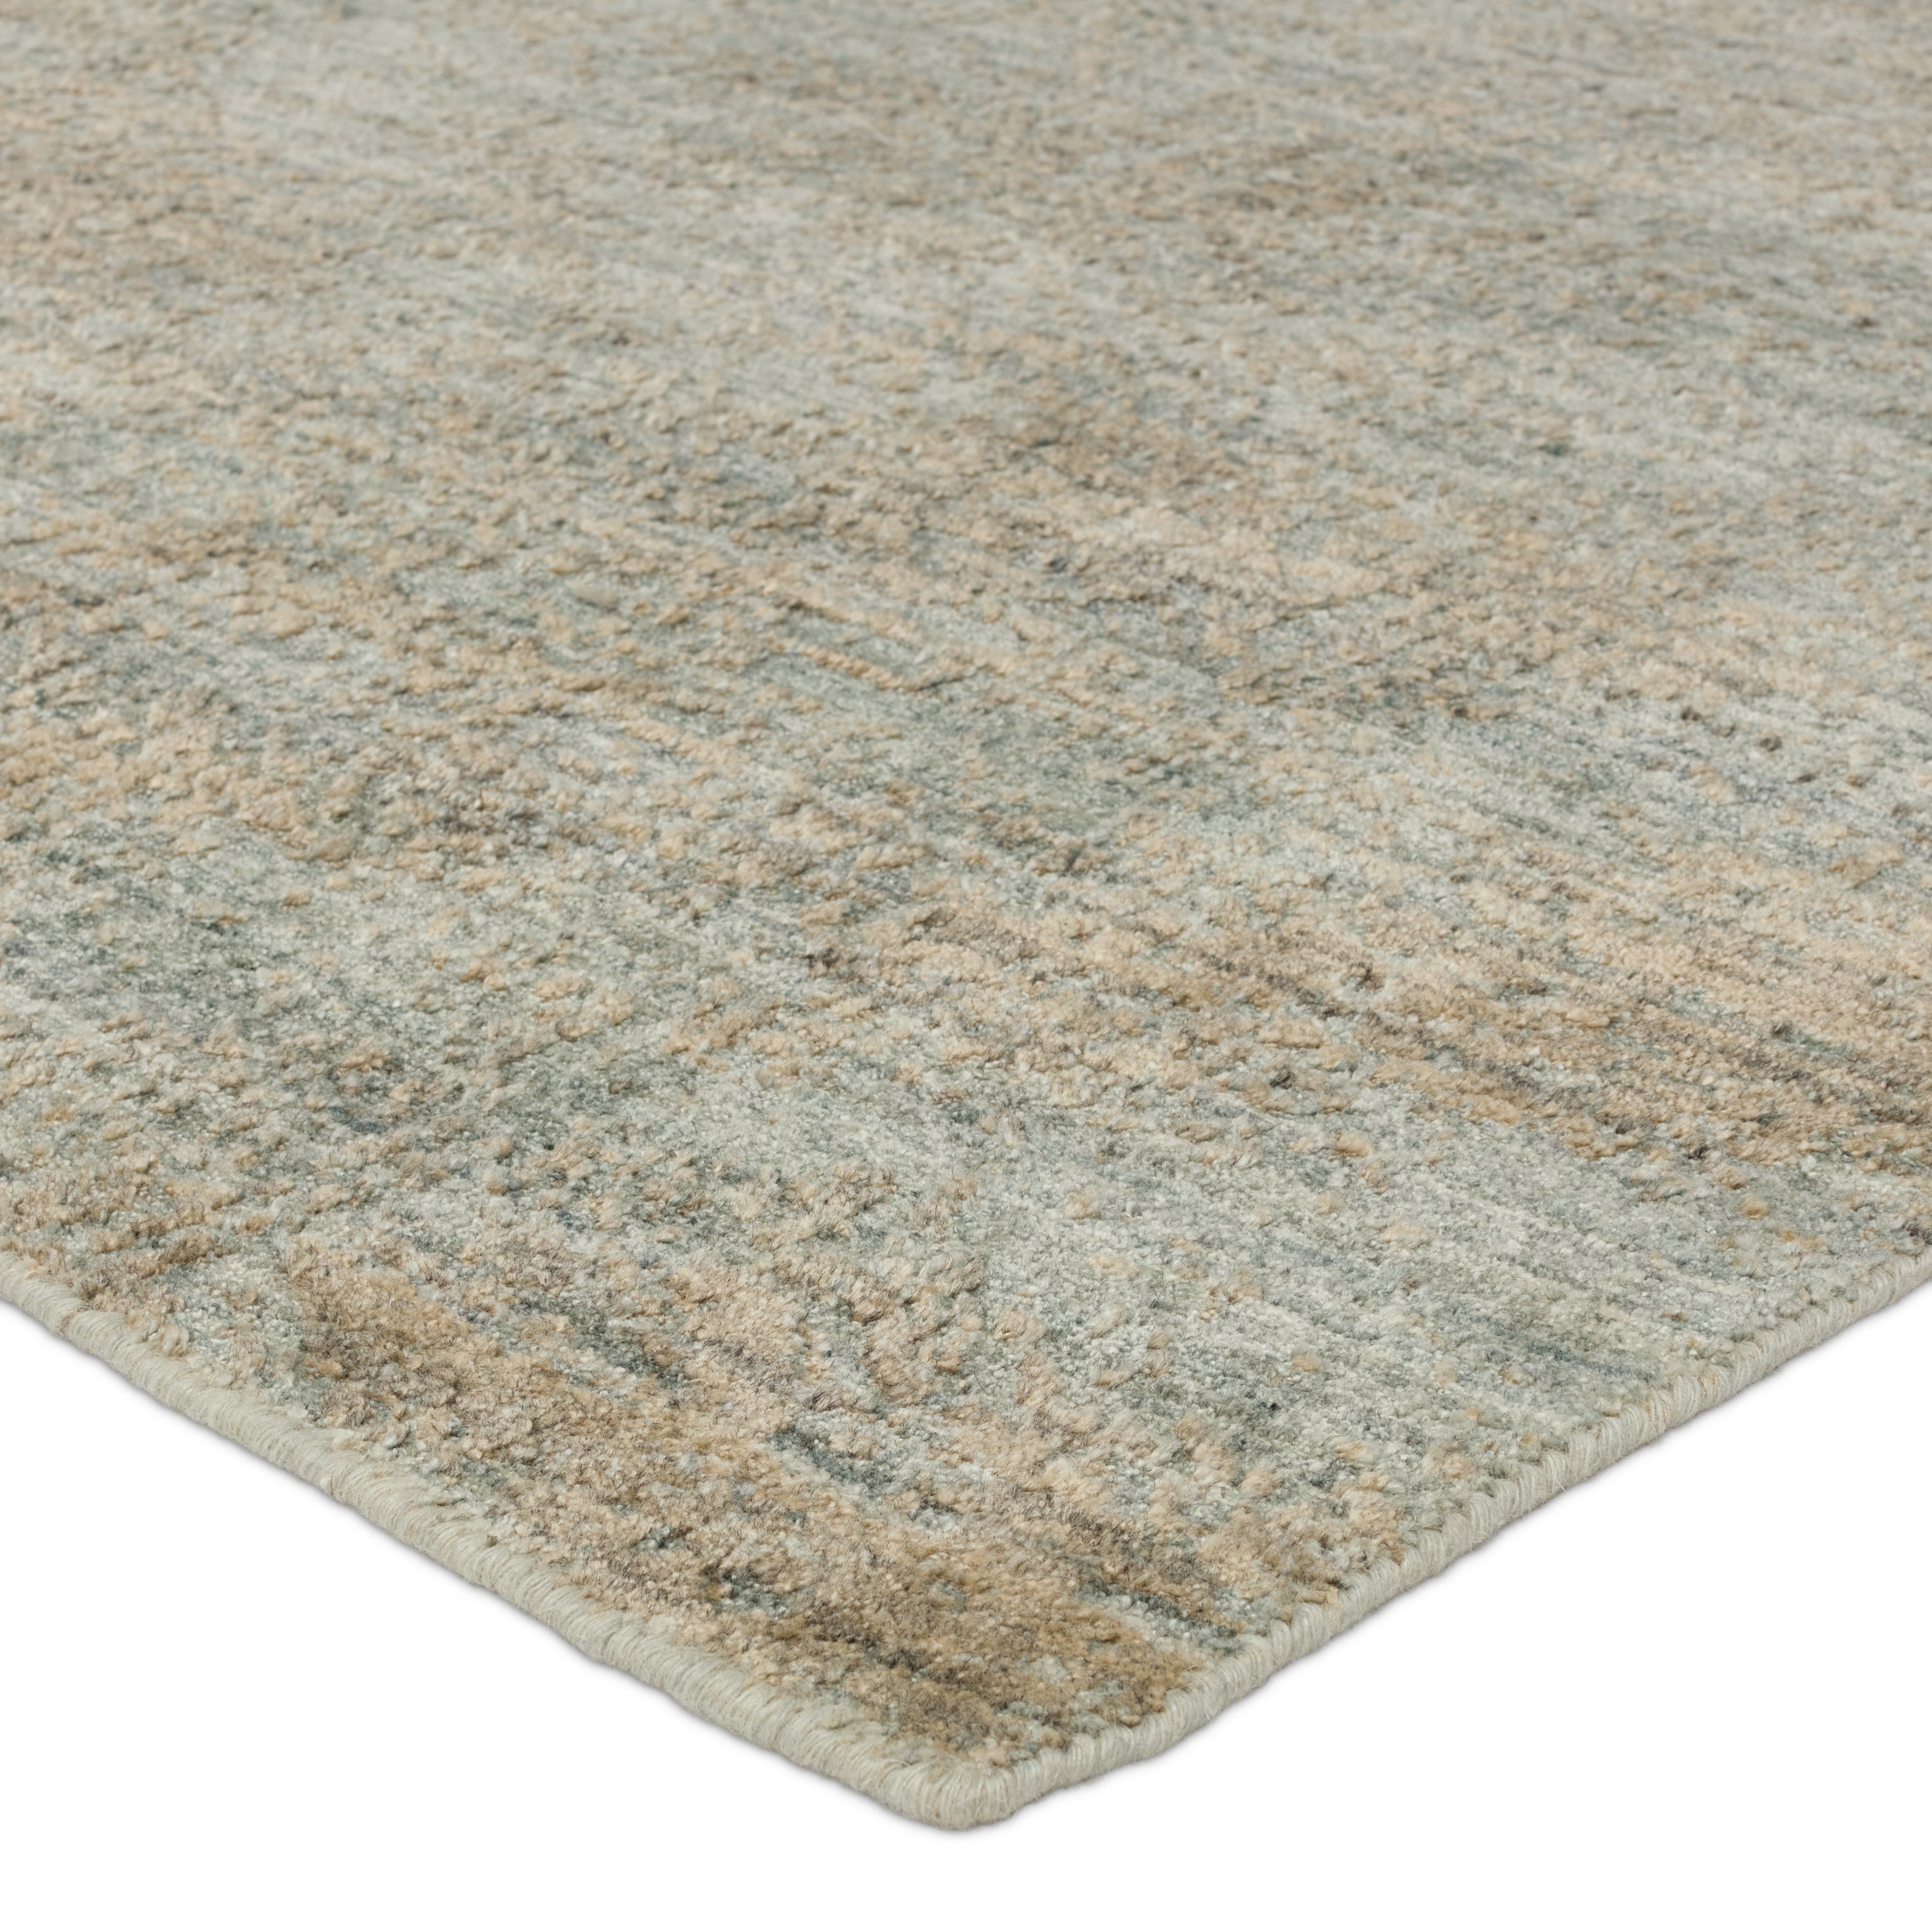 The elegant and modernized designs of the Genevieve collection feature an exquisite hand-loomed jacquard weave with stunning texture. The Arano rug boasts hand-embossed details in a balanced, versatile colorway of taupe, tan, gray, and cream tones. A blend of wool and soft viscose lends dimension and depth to this handwoven rug. Amethyst Home provides interior design, new construction, custom furniture, and area rugs in the Scottsdale metro area.